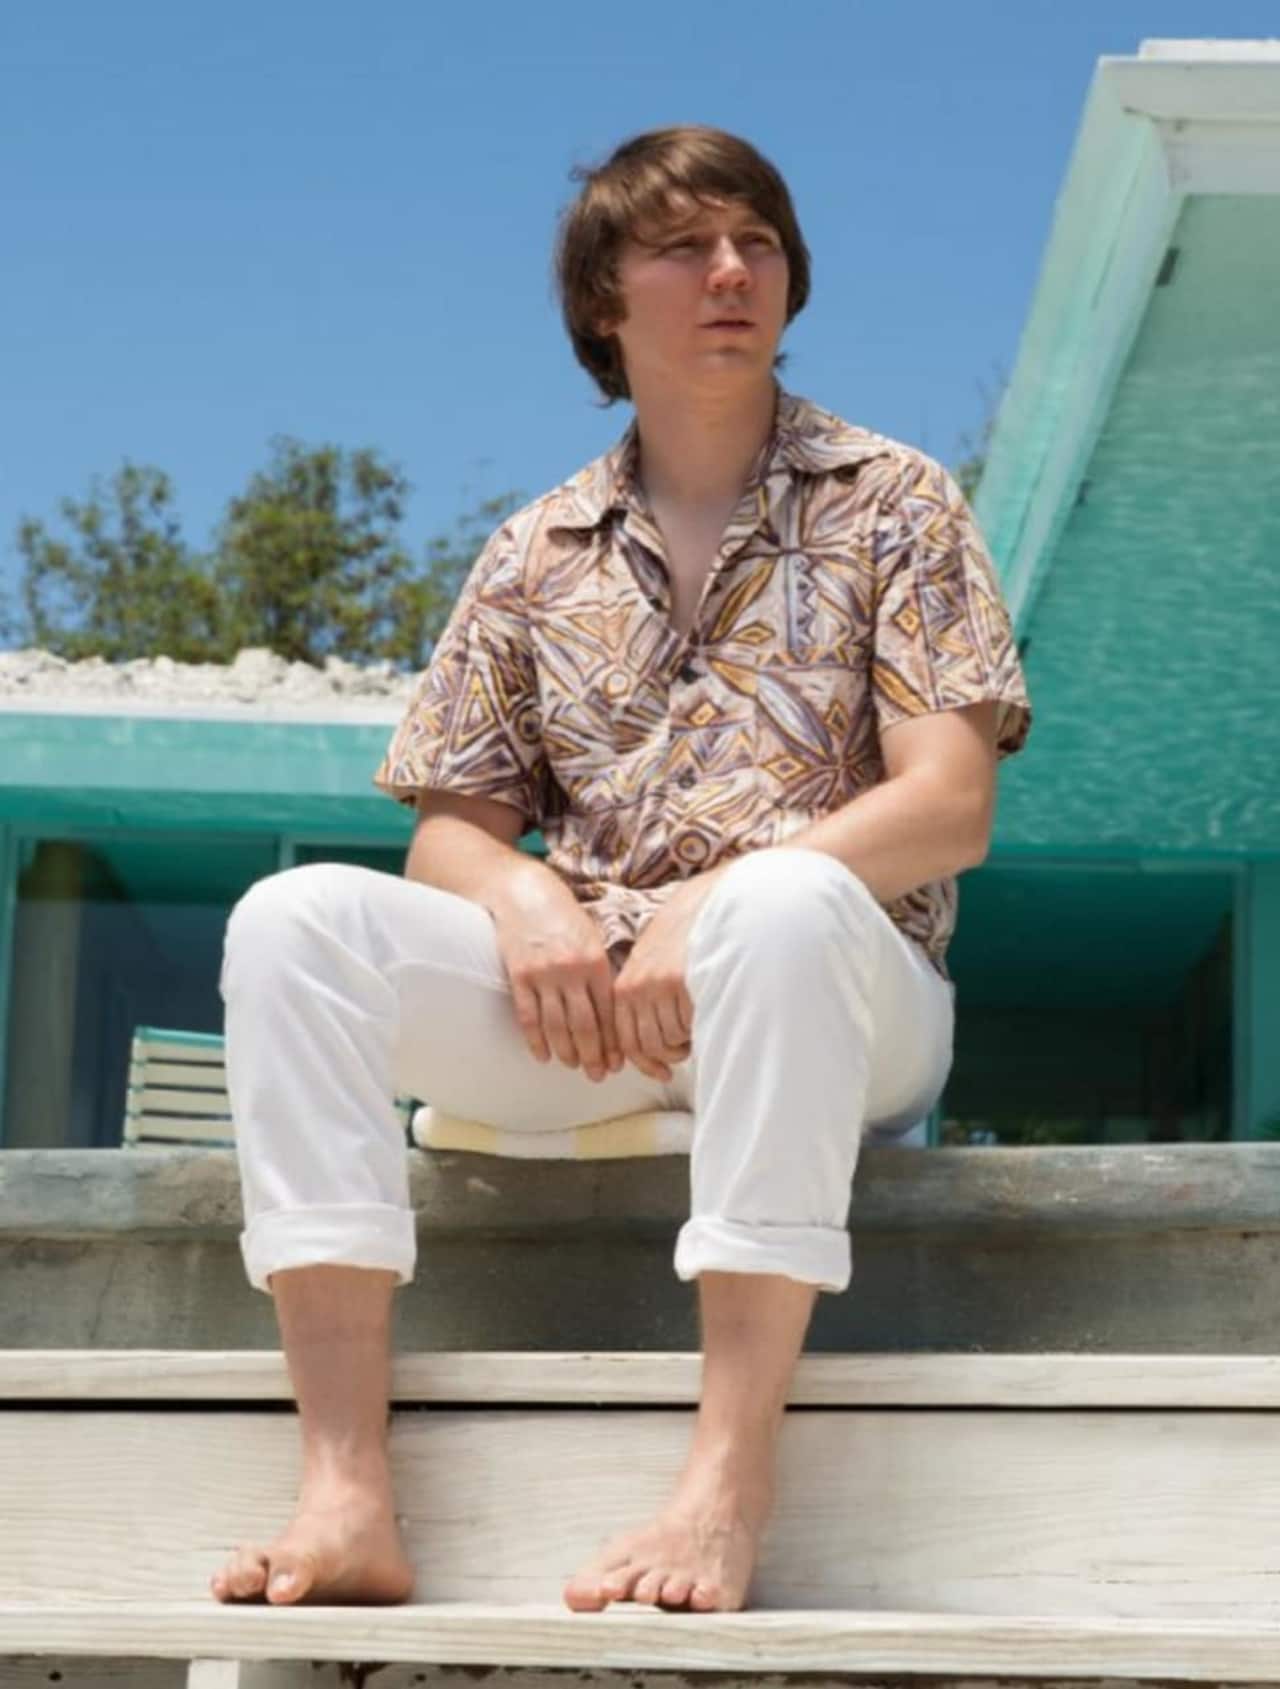 Paul Dano plays a young Brian Wilson in the film 'Love & Mercy.' He was nominated for a Golden Globe for best performance by an actor in a supporting role in a motion picture for the role.